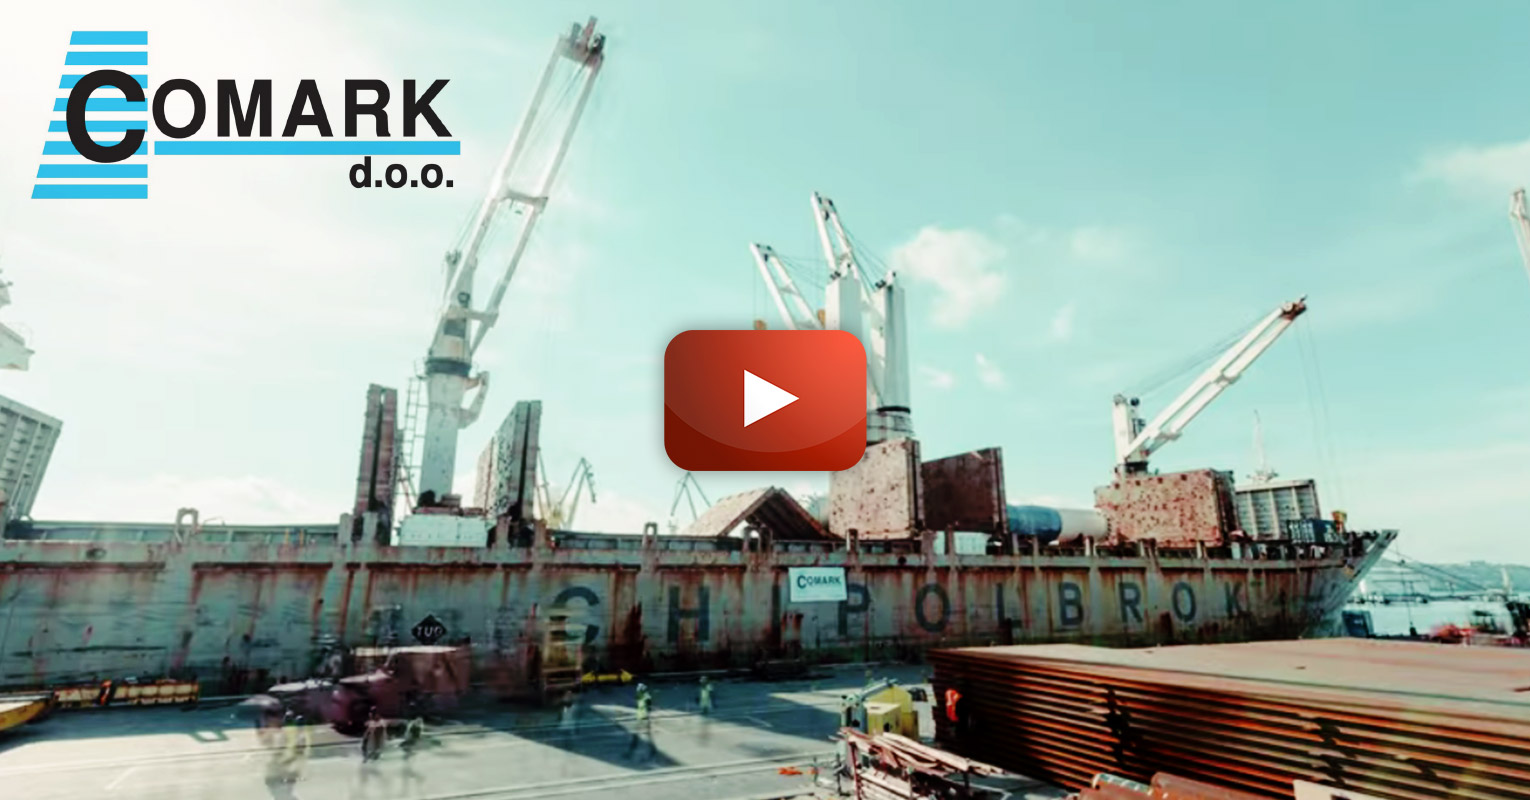 Video - Comark Project Logistics Shared this Project Cargo Operations Timelapse